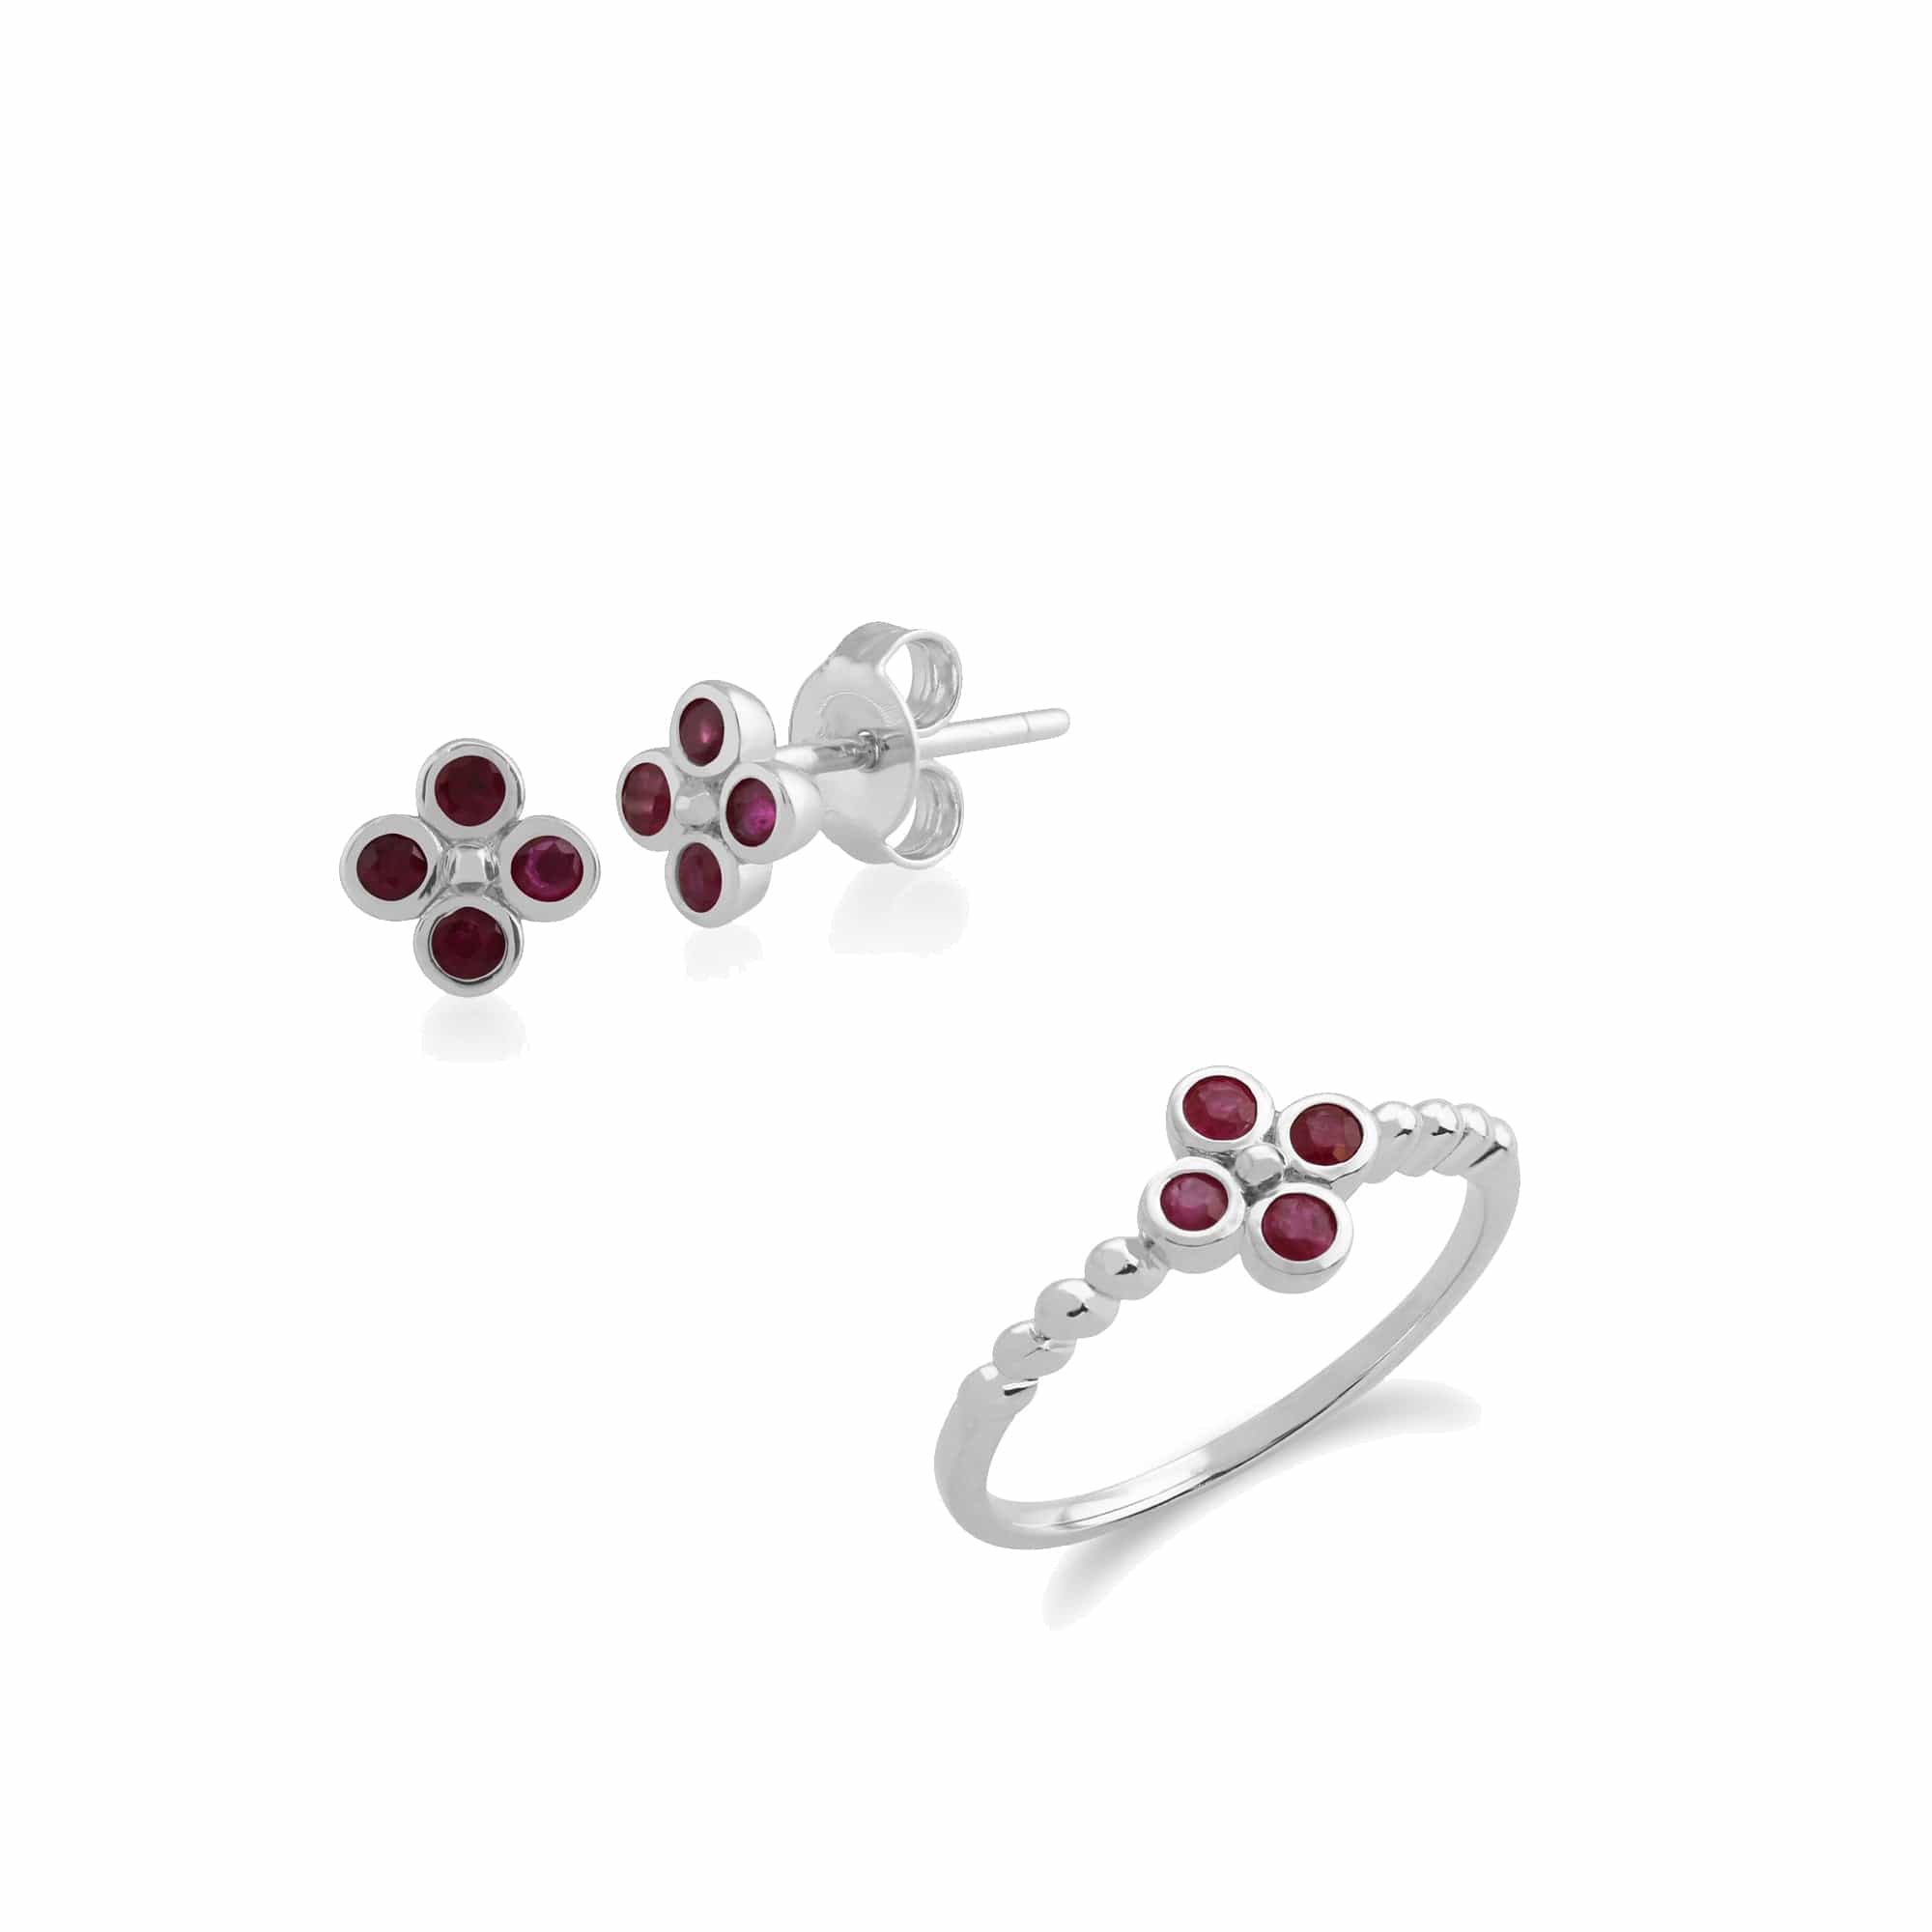 Floral Round Ruby Clover Stud Earrings & Ring Set in 925 Sterling Silver - Gemondo